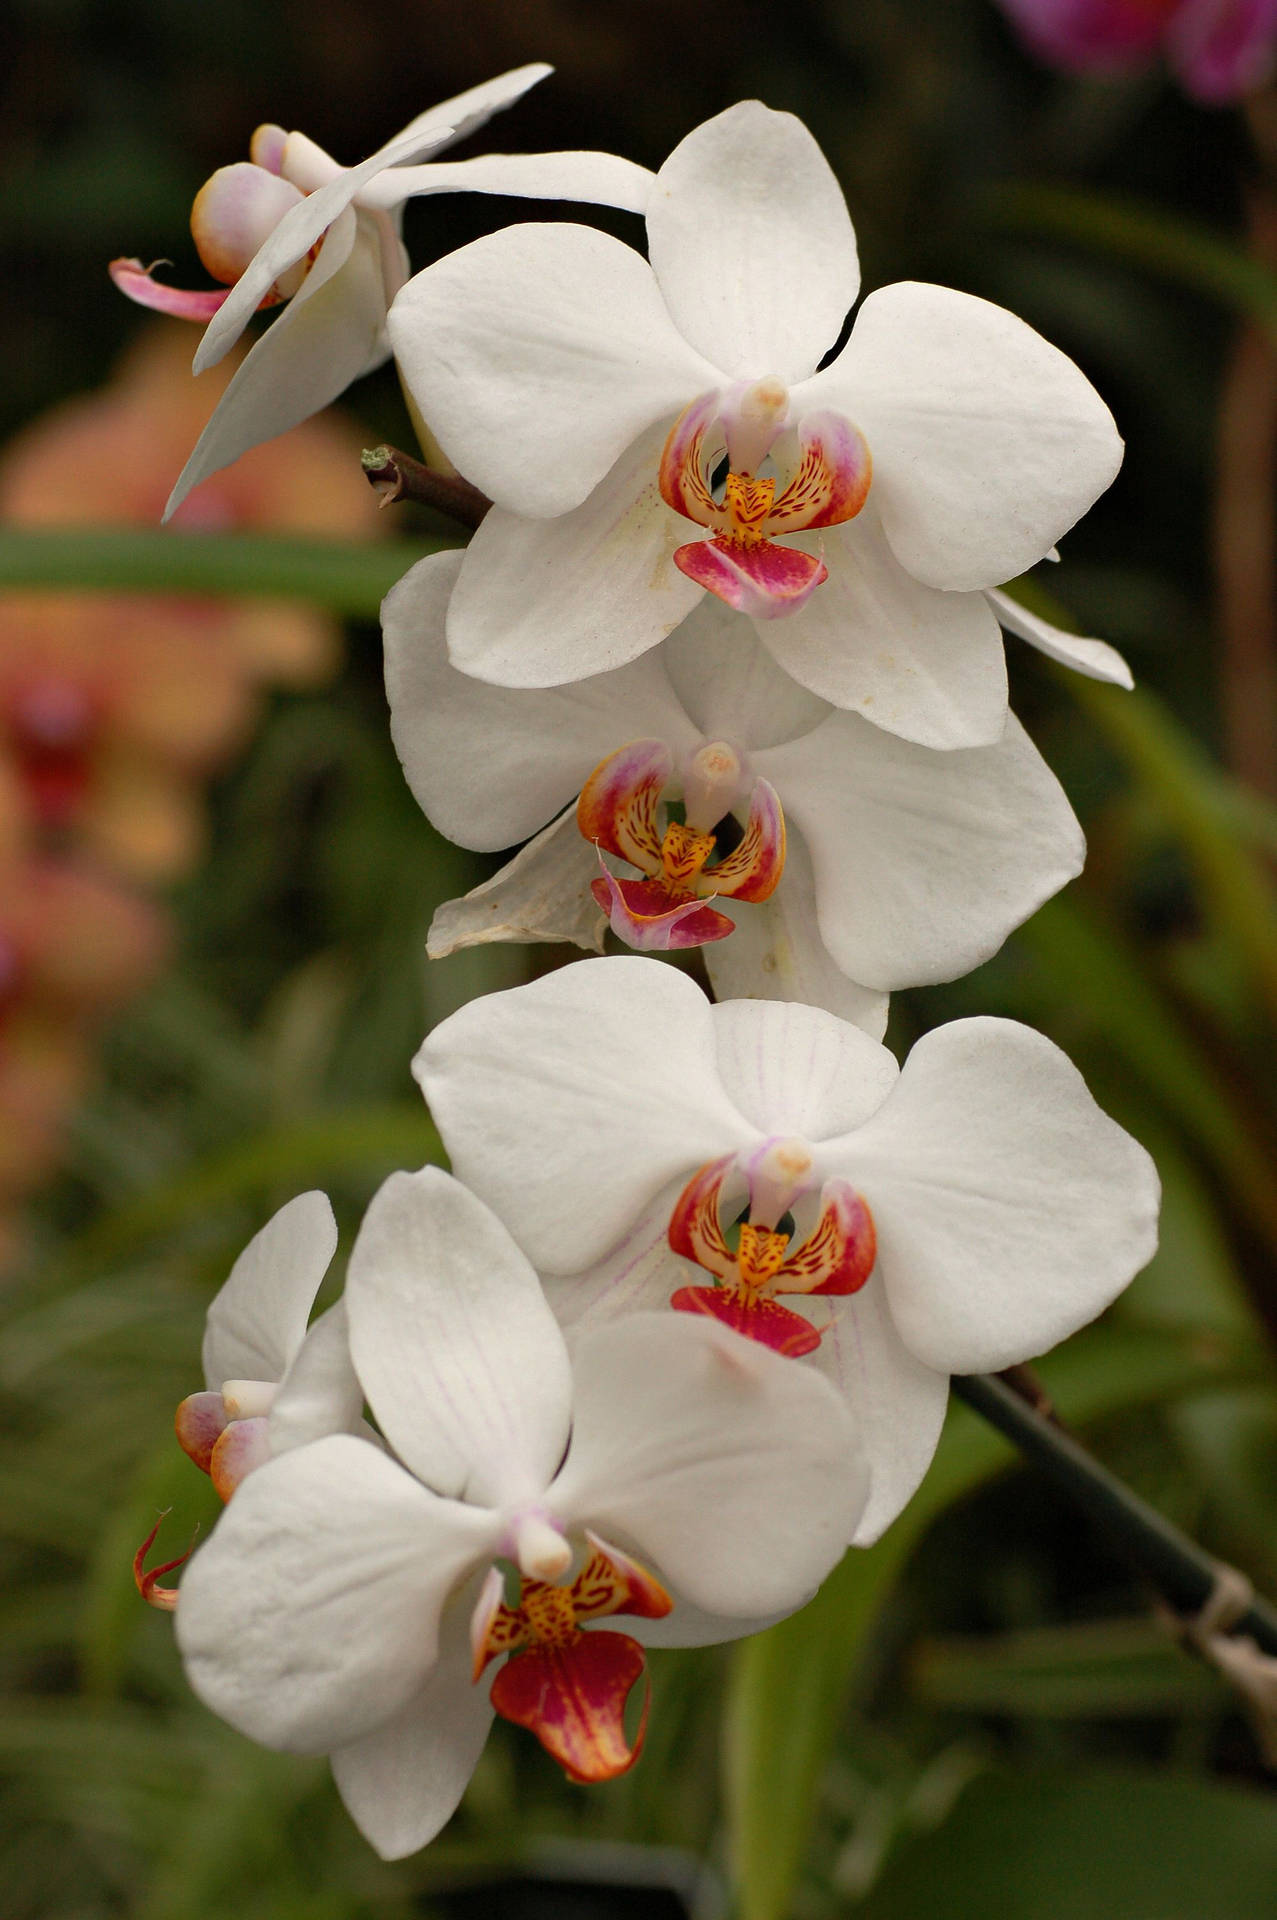 White Orchids With Red Center Petals